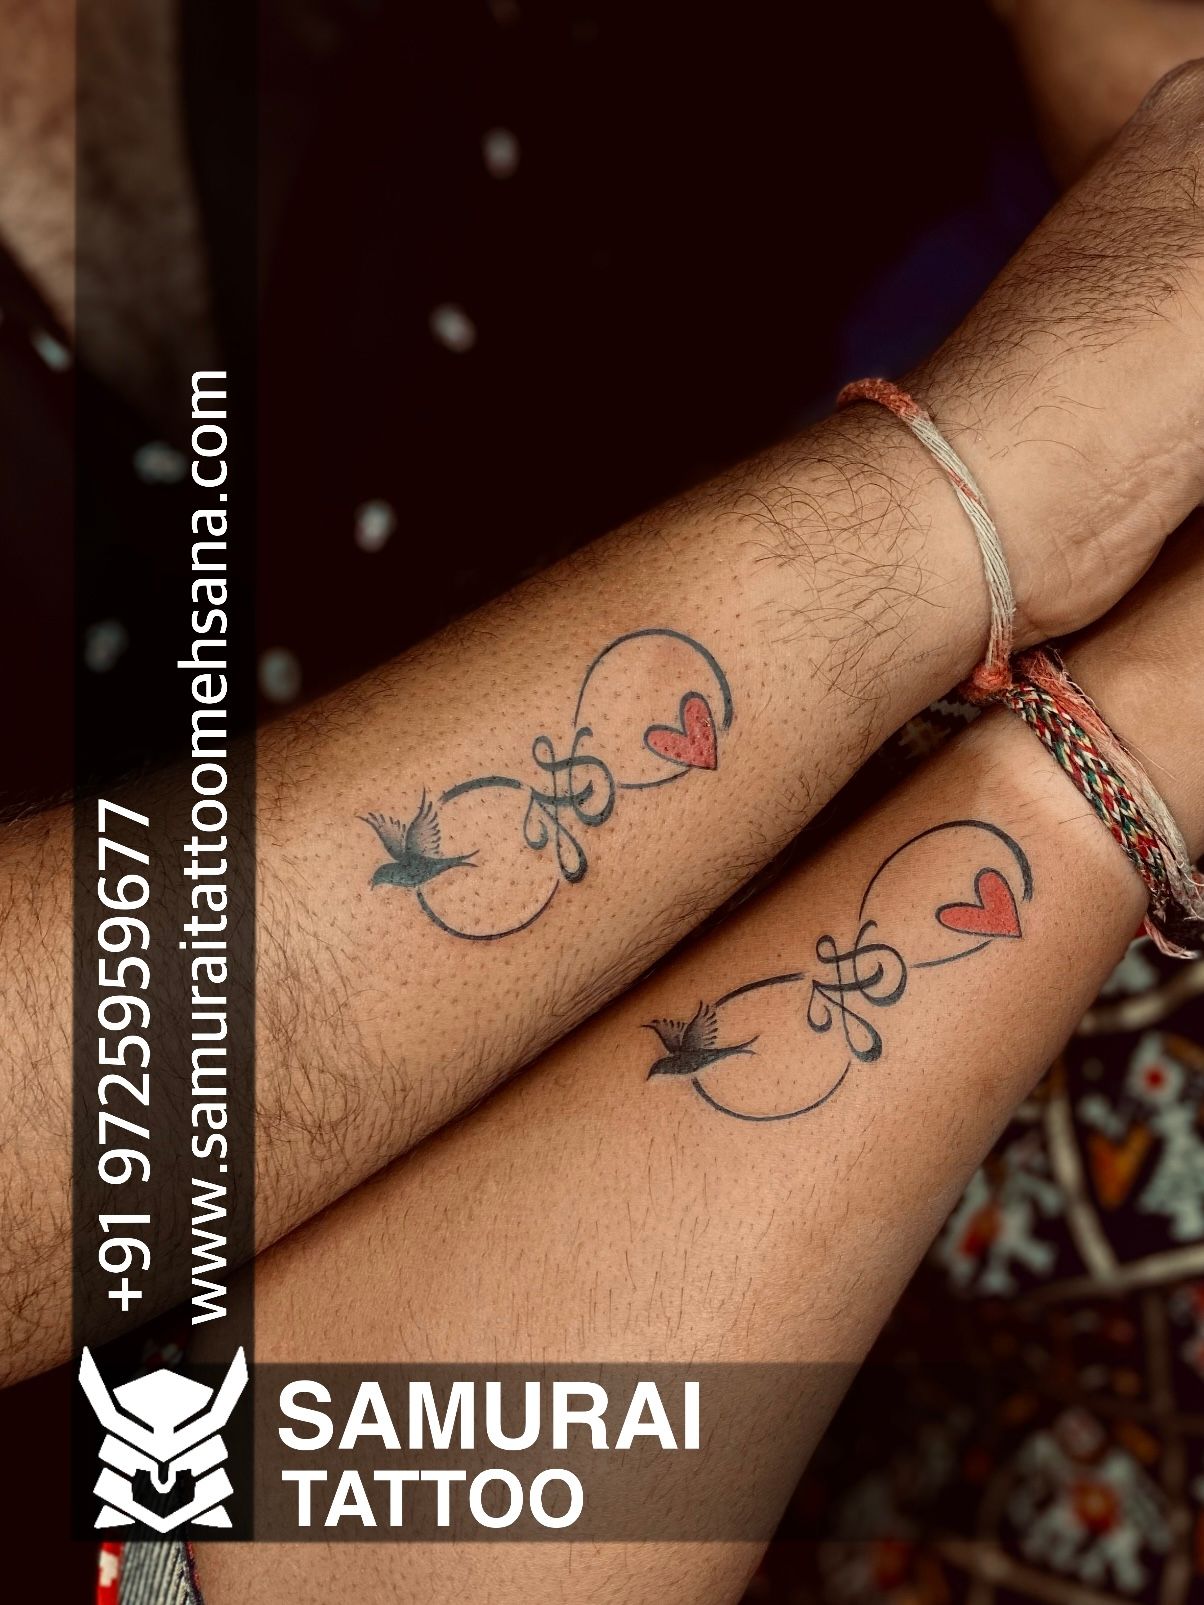 10 Couples Tattoo Ideas Your Relationship Definitely Needs - The Good Men  Project